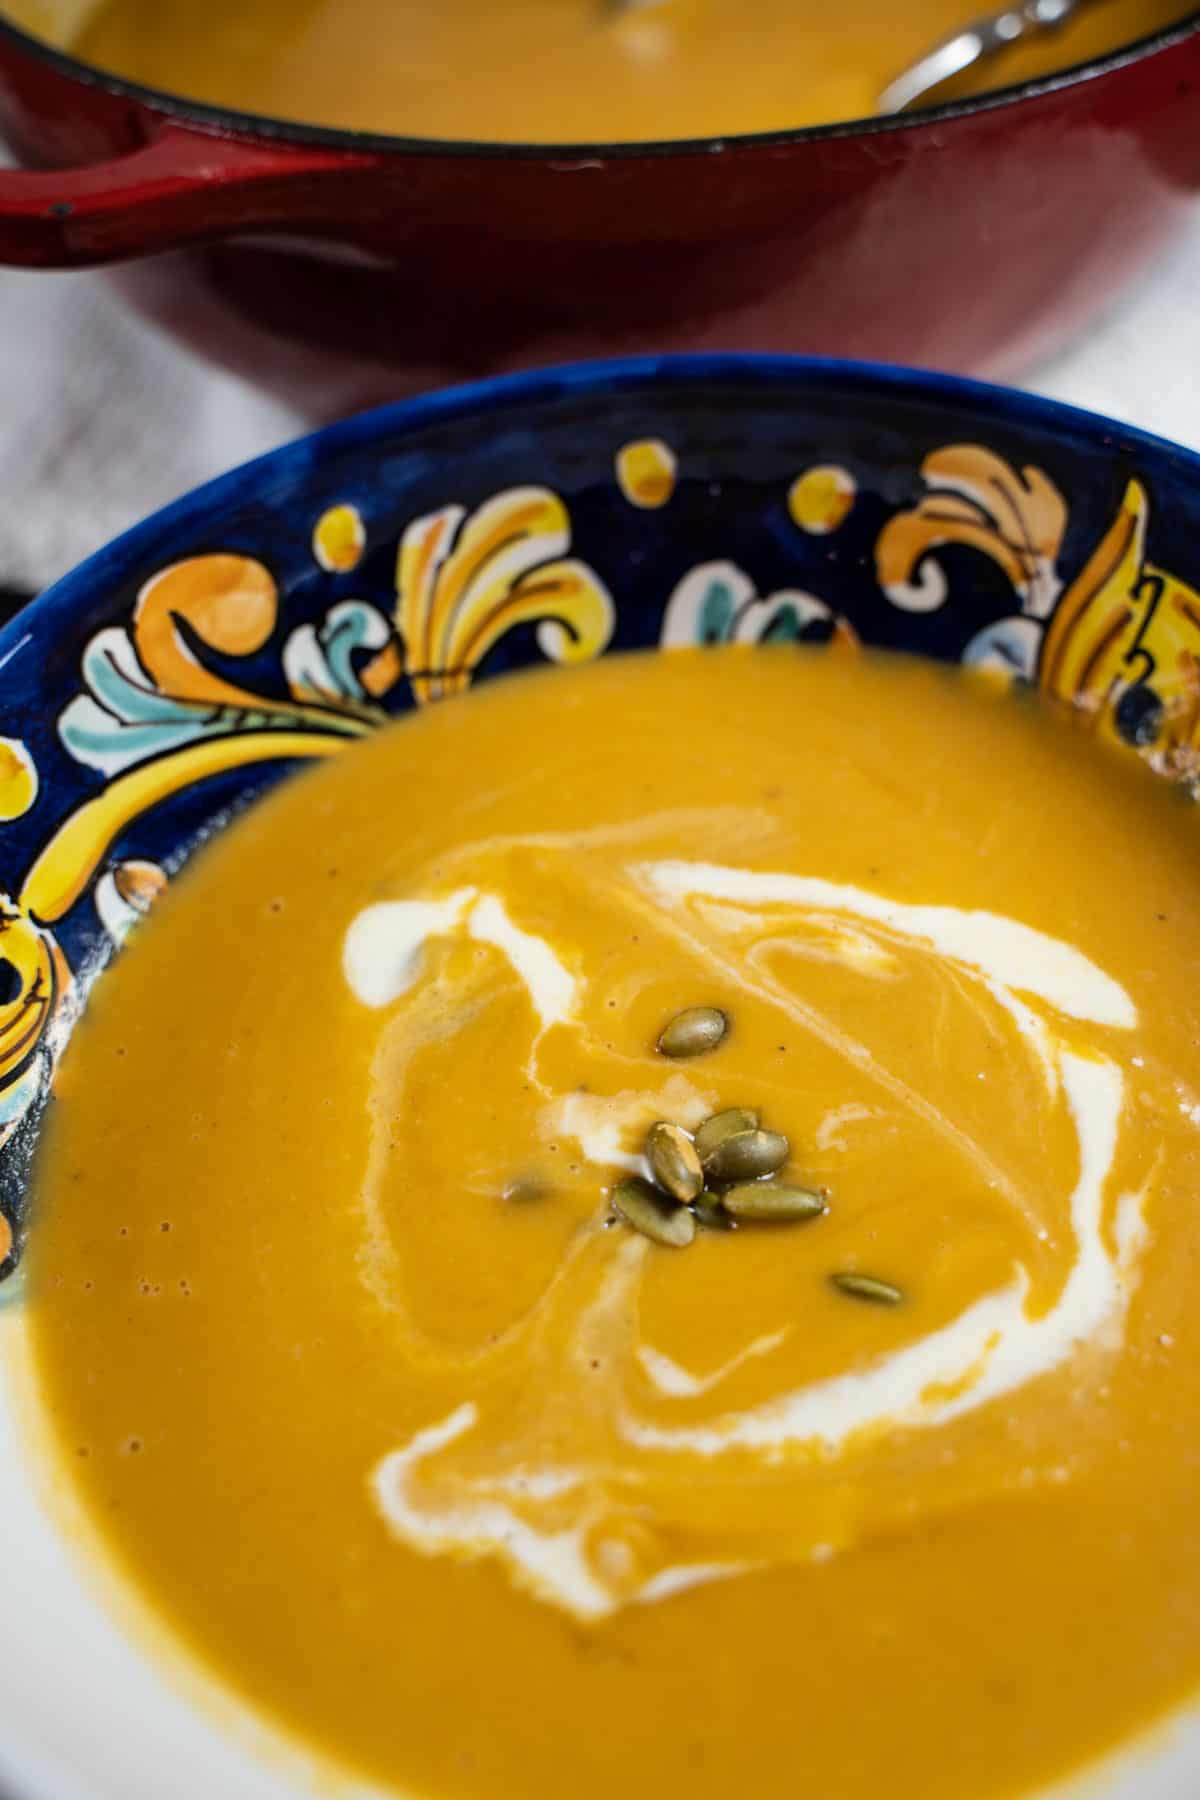 Roasted Butternut Squash, pear and ginger soup pureed in a Italian hand painted bowl on a wood table.